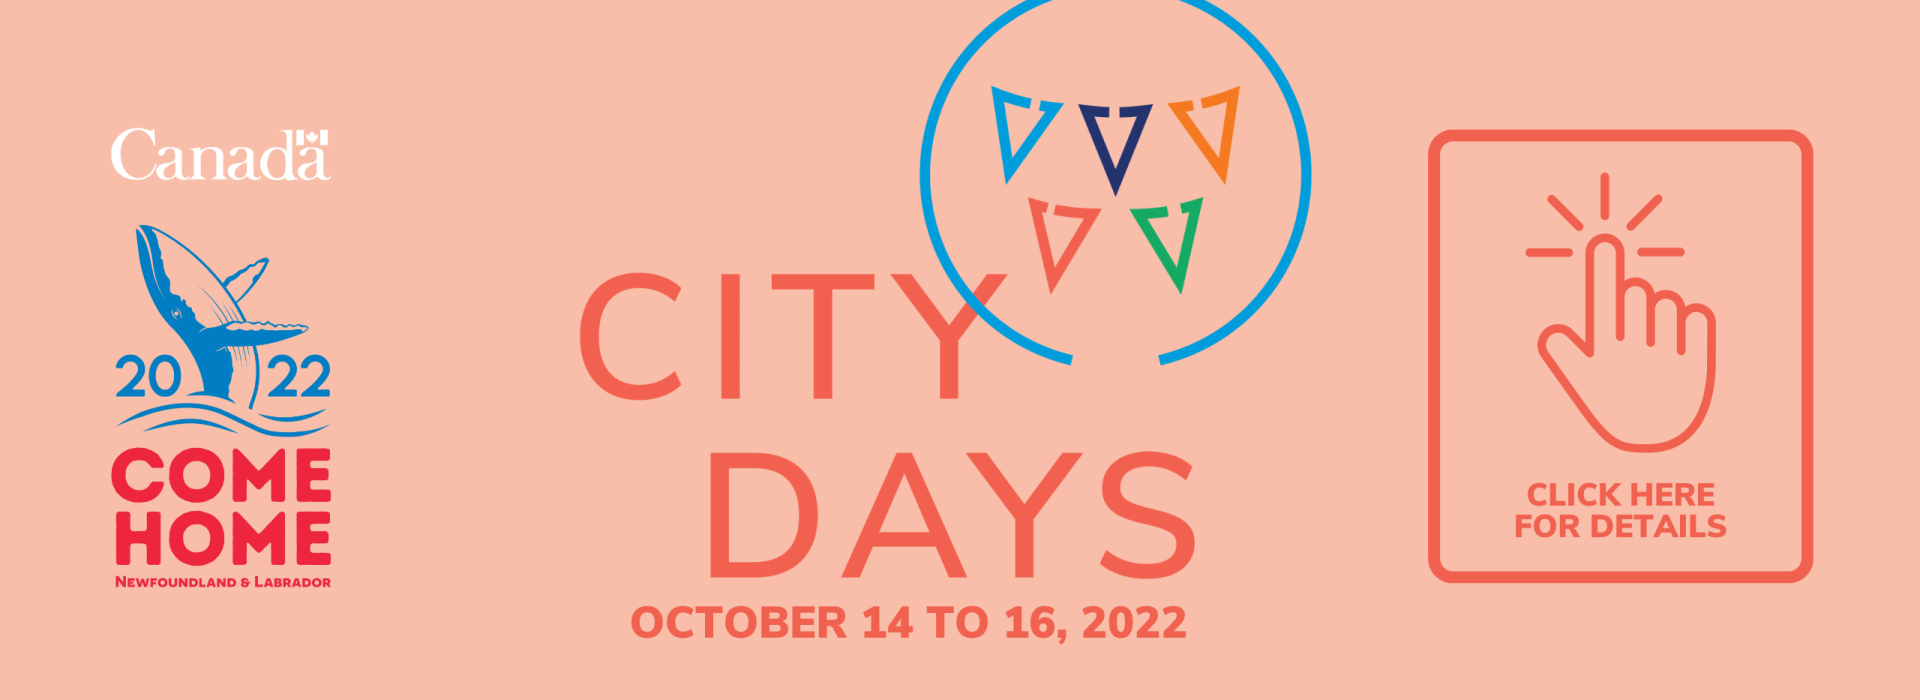 Fall City Days Website Graphic_2560 × 934 px